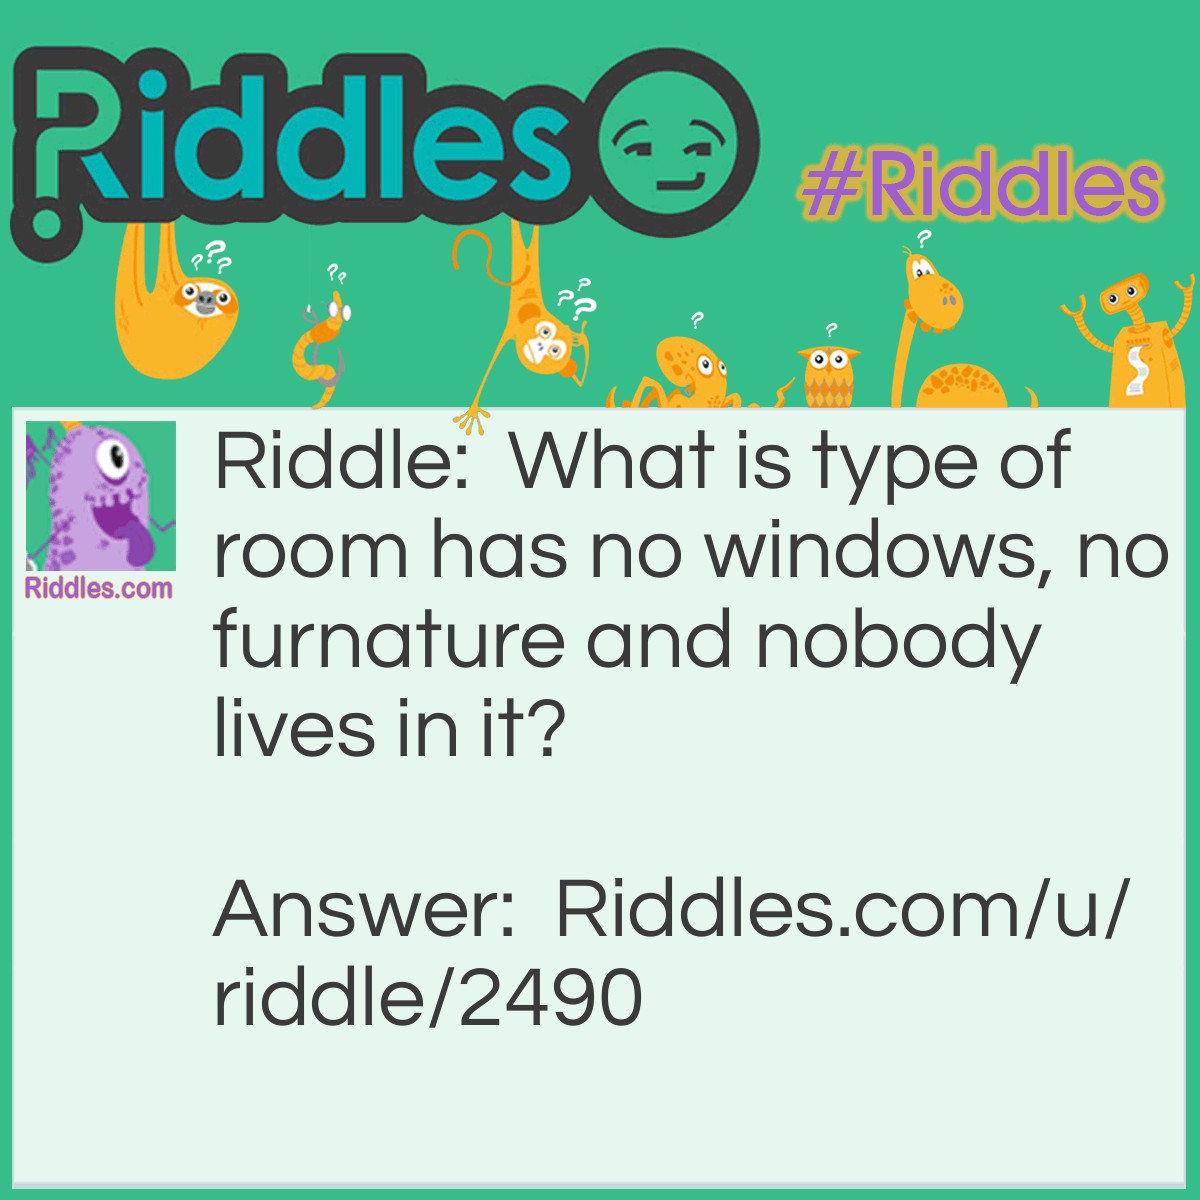 Riddle: What is type of room has no windows, no furnature and nobody lives in it? Answer: A mushroom.